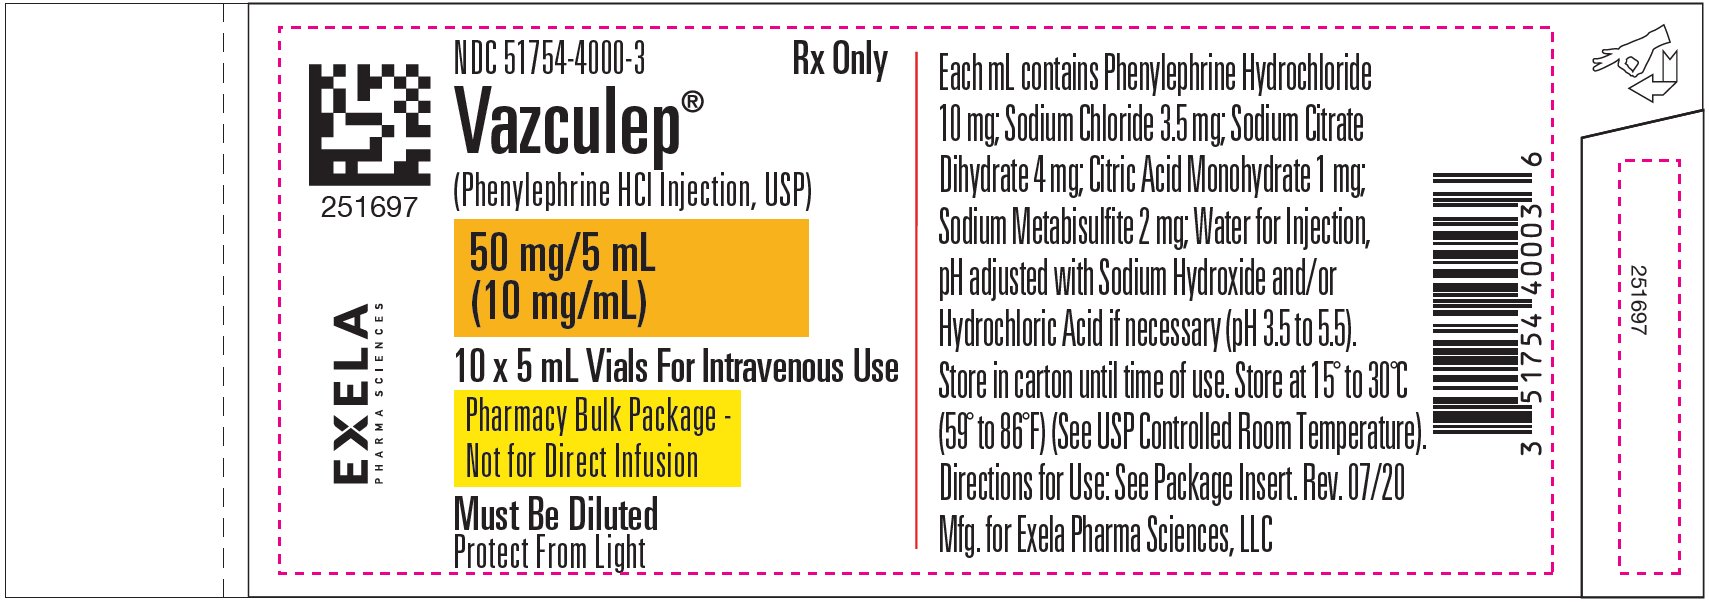 5 mL Vial - Extended Content Label